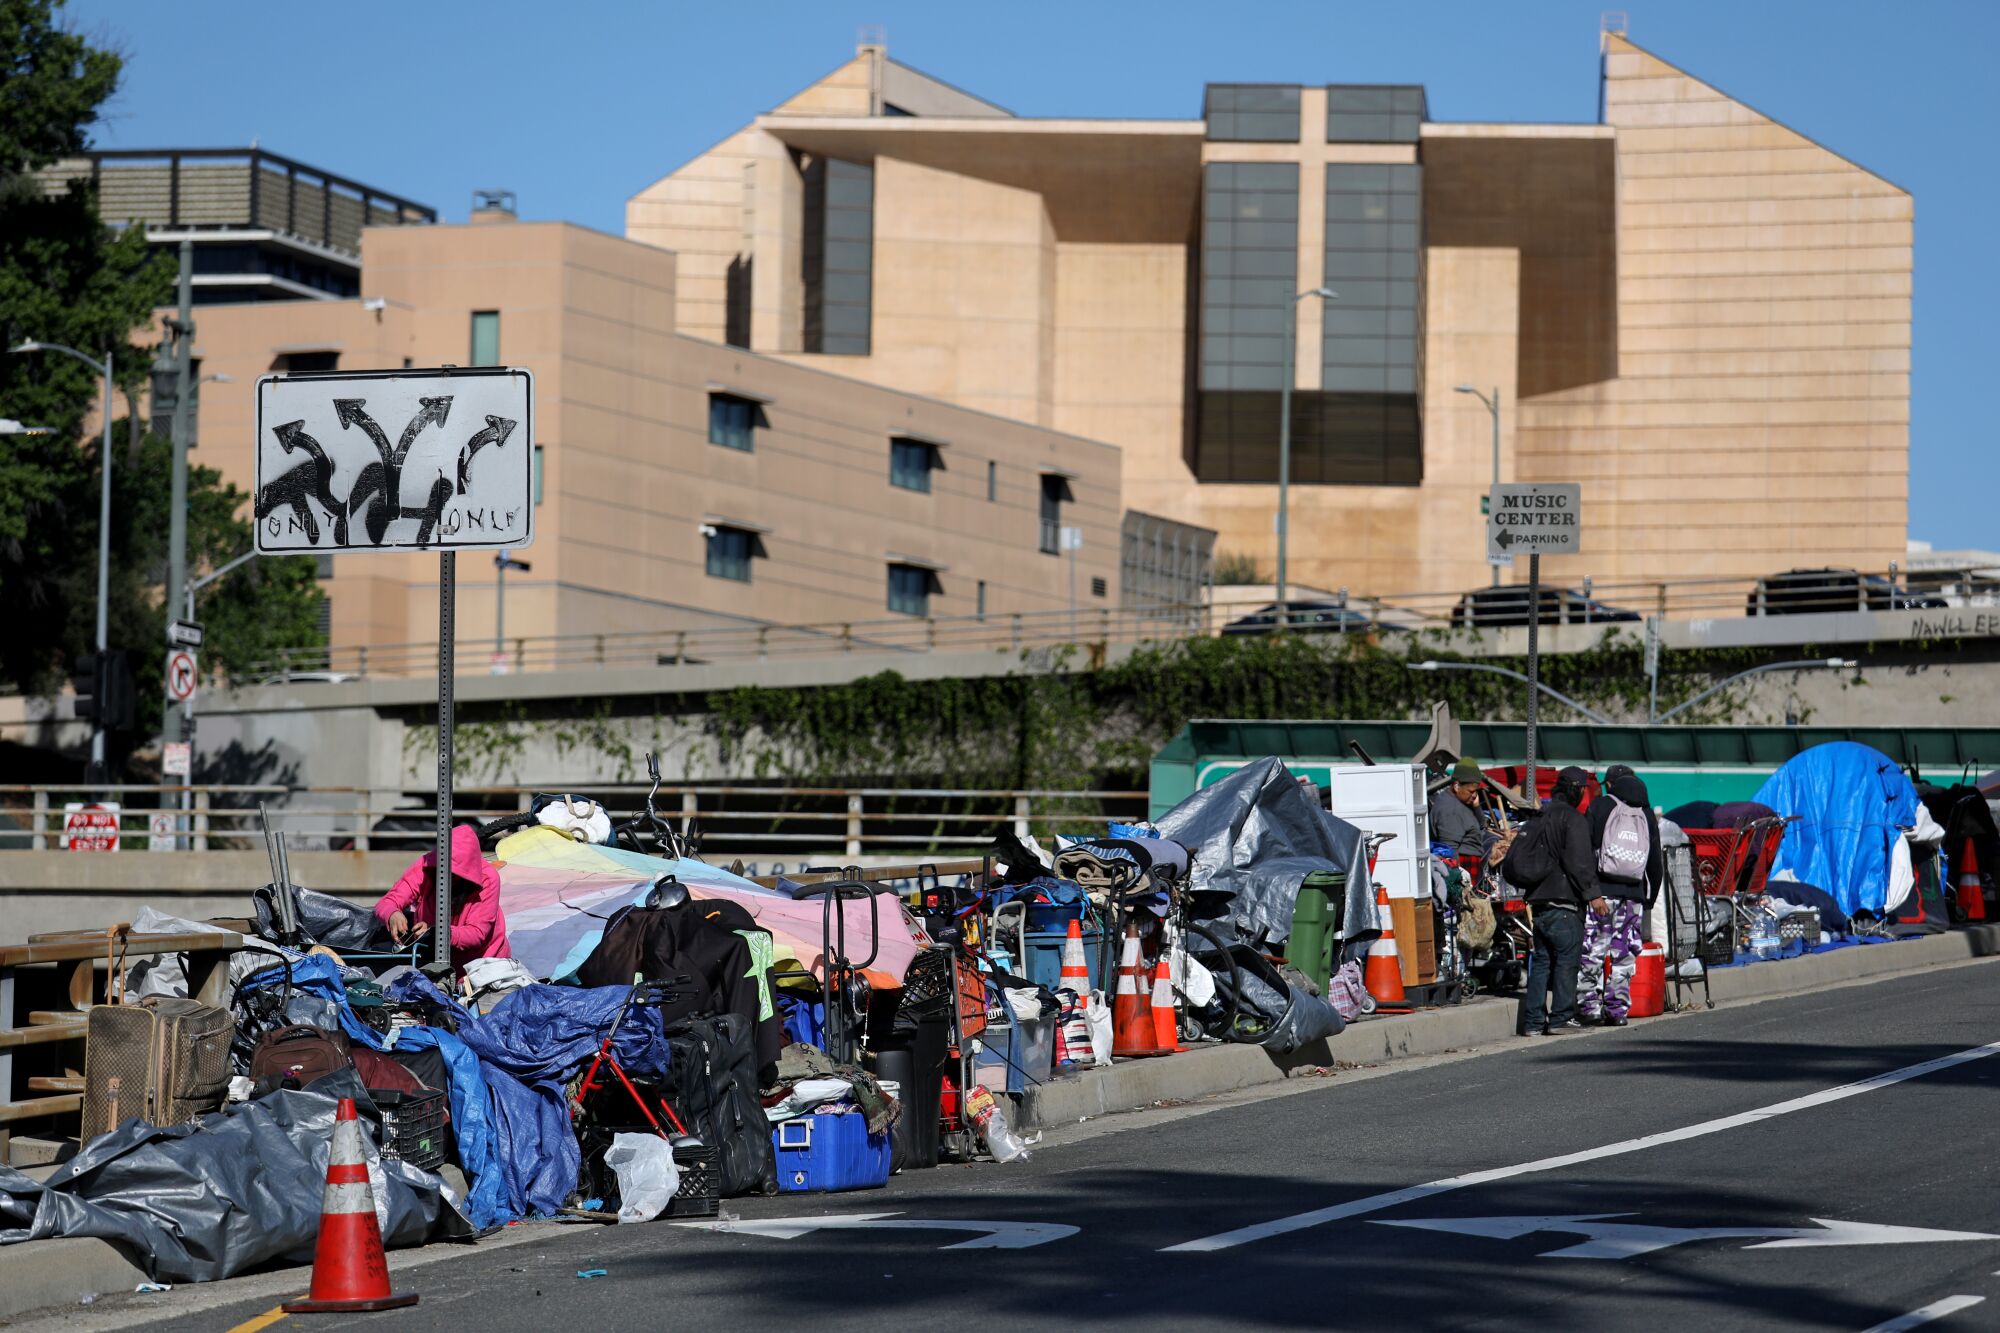 A sidewalk is crowded with bags, suitcases, carts and tarps.